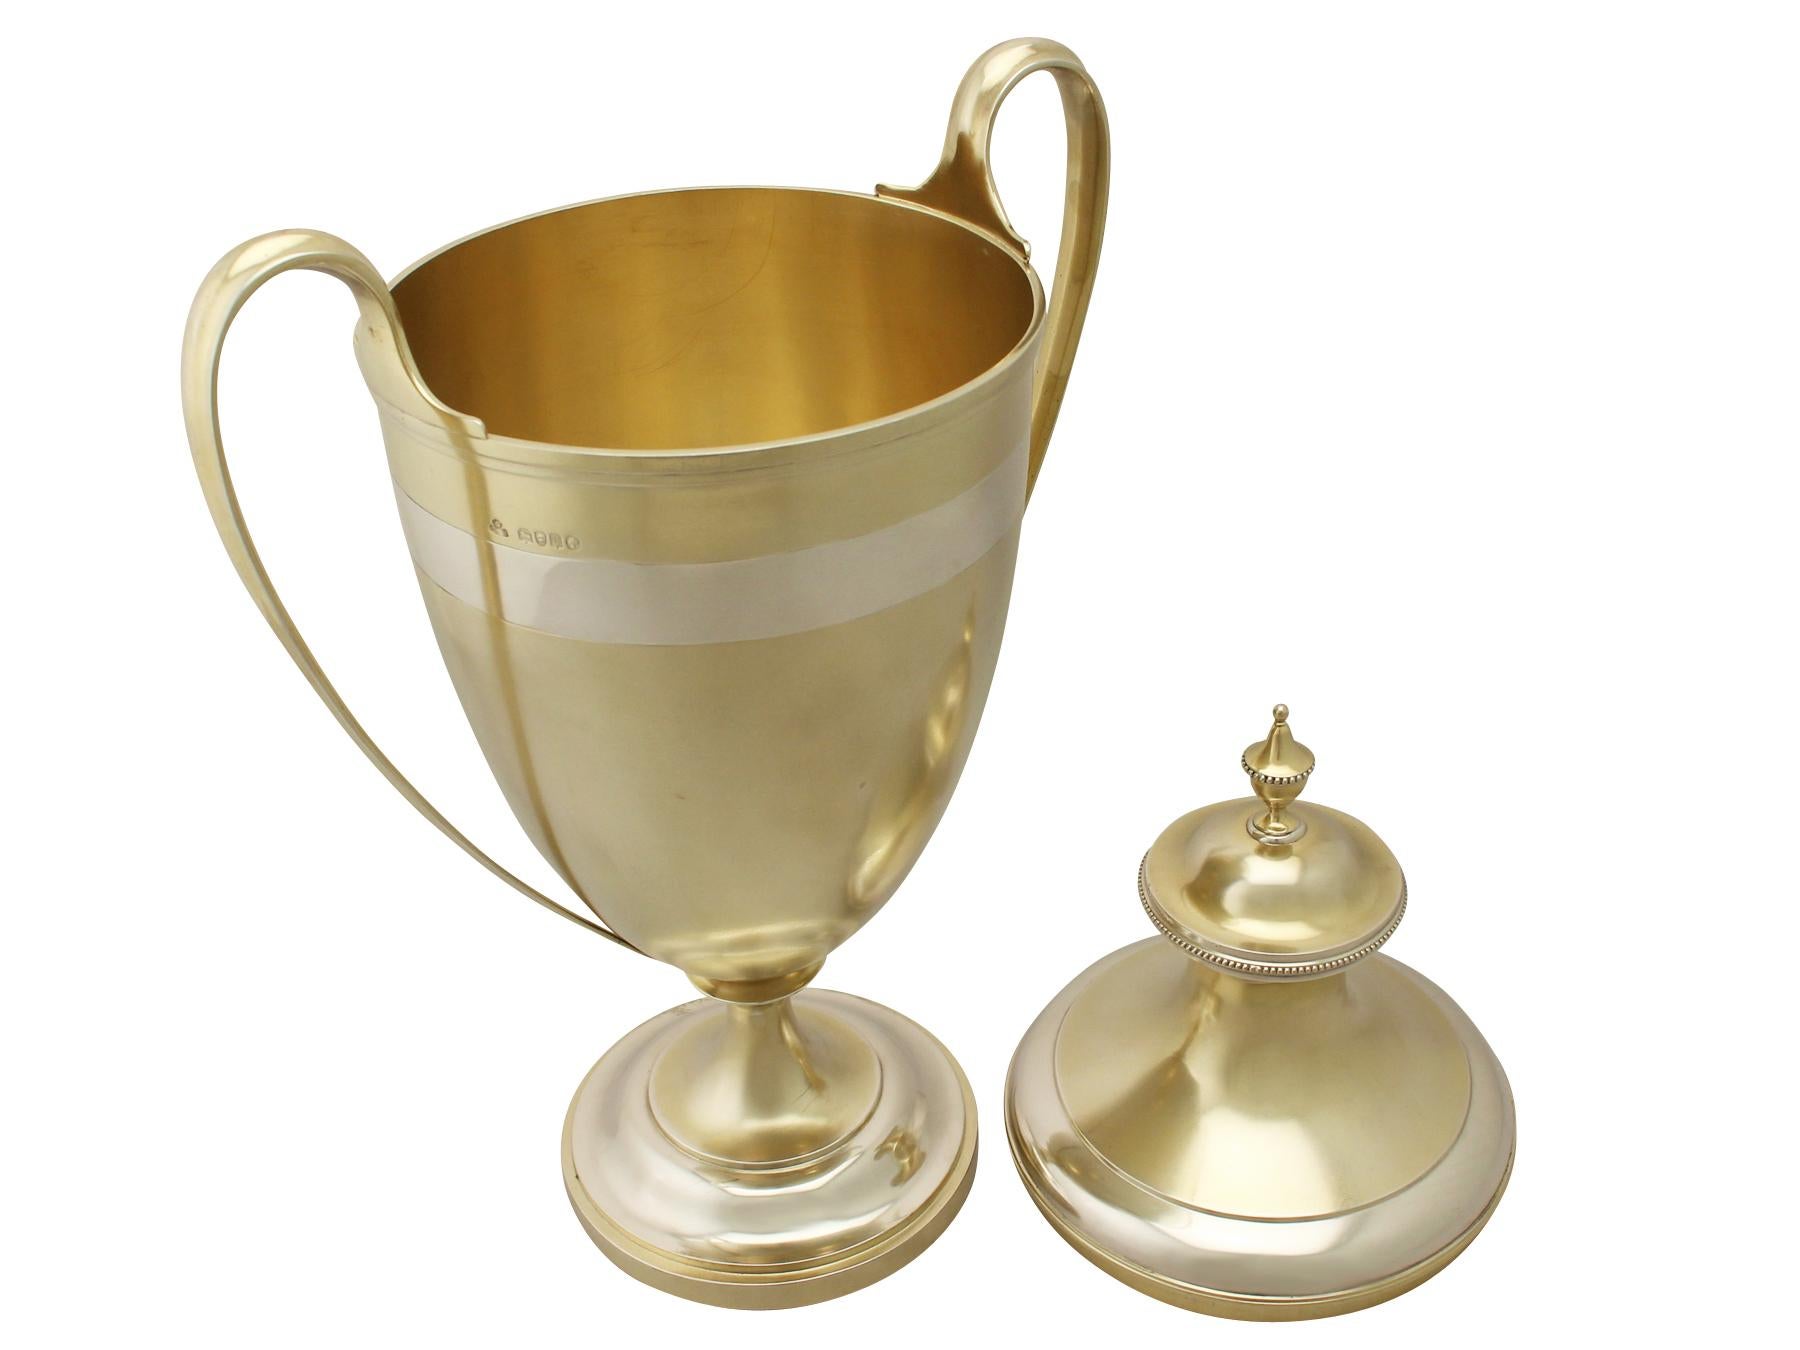 19th Century Sterling Silver Gilt Presentation Cup and Cover In Excellent Condition For Sale In Jesmond, Newcastle Upon Tyne